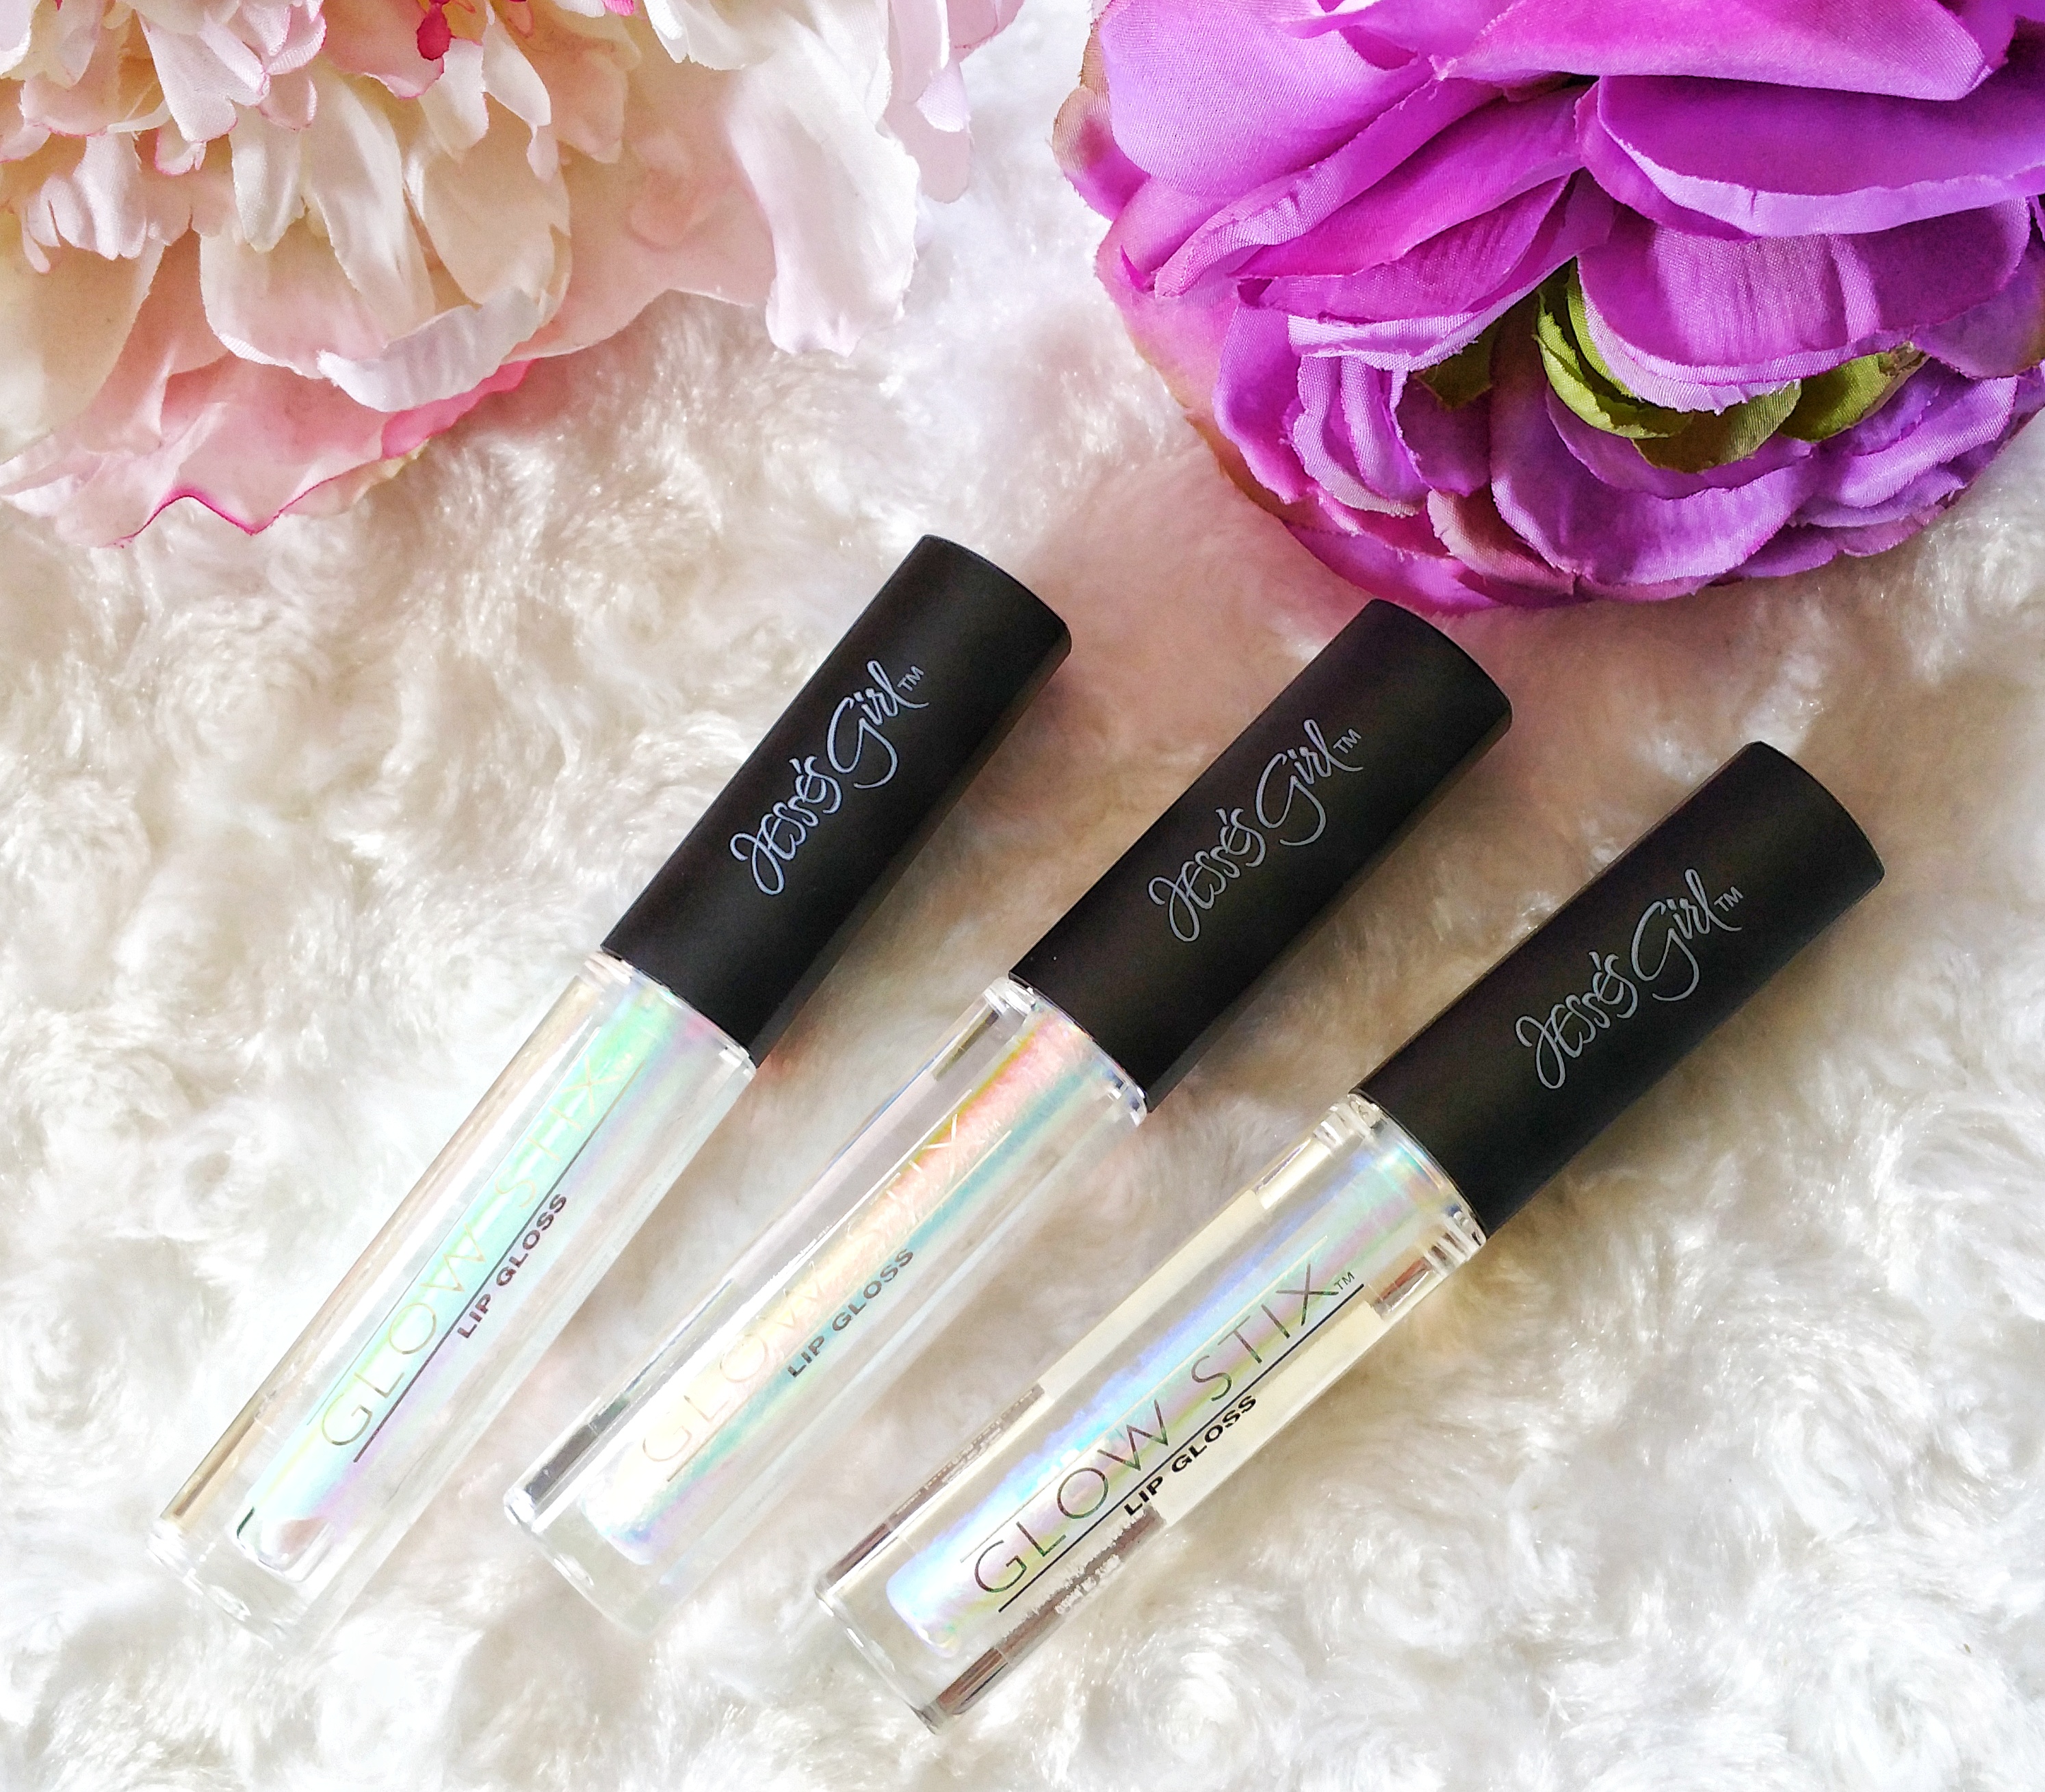 lip gloss, jesses girl, jesses girl glow stix lip gloss, holographic lip gloss, gloss, makeup, beauty, swatches, iridescent lip gloss, makeup review, review, product review, lips, 